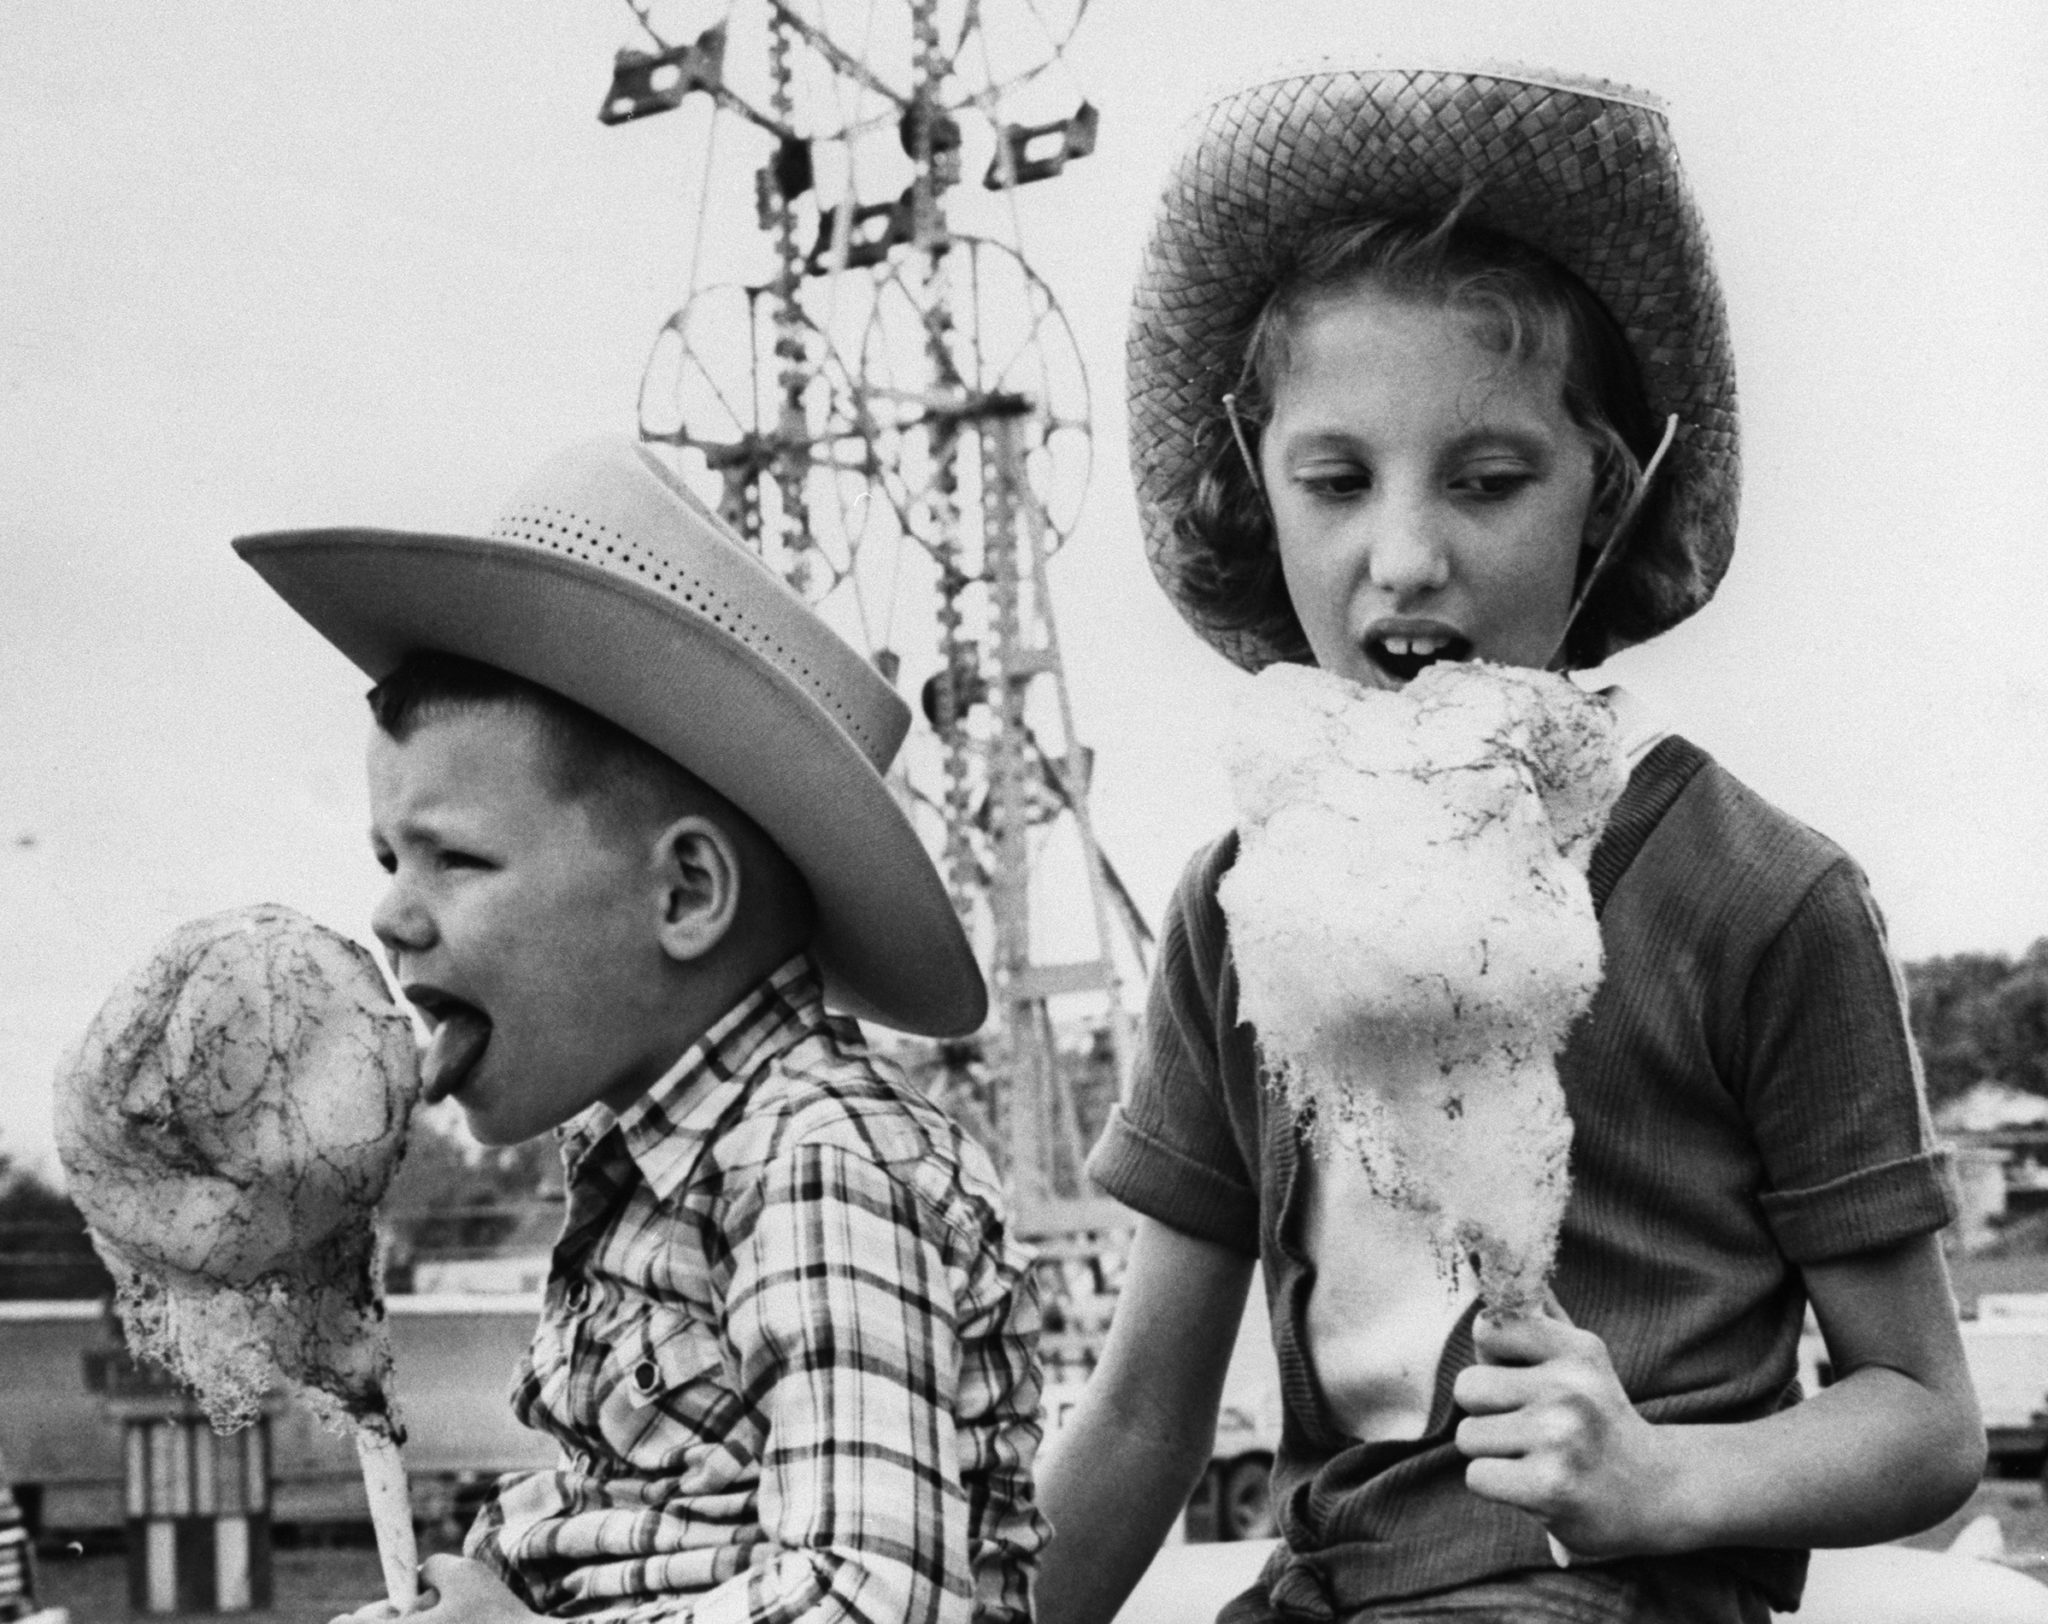 Rodeo History - Boy and Girl Eating Cotton Candy